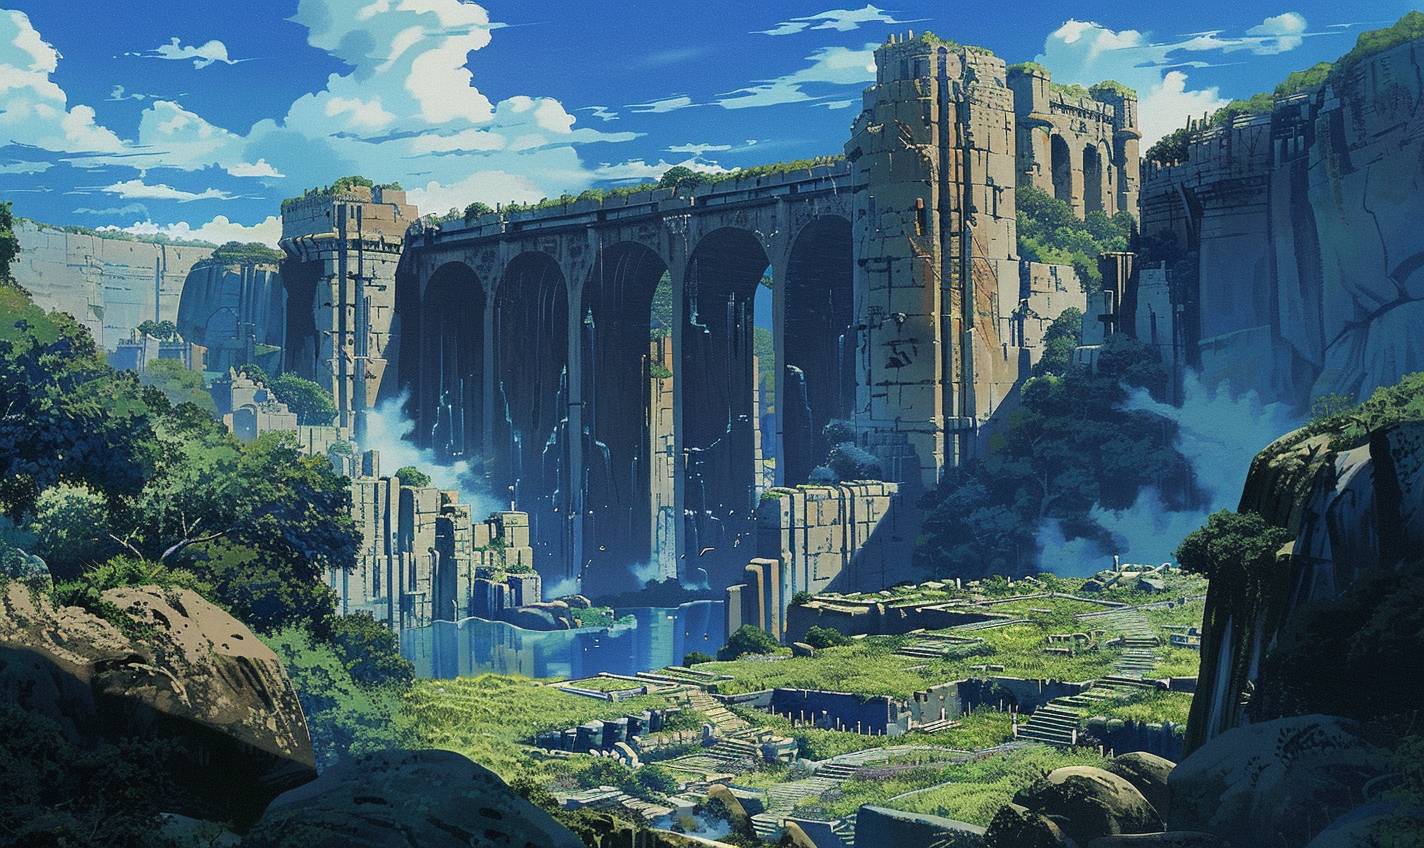 In the style of Yoshiyuki Tomino, forgotten citadel of an ancient civilization